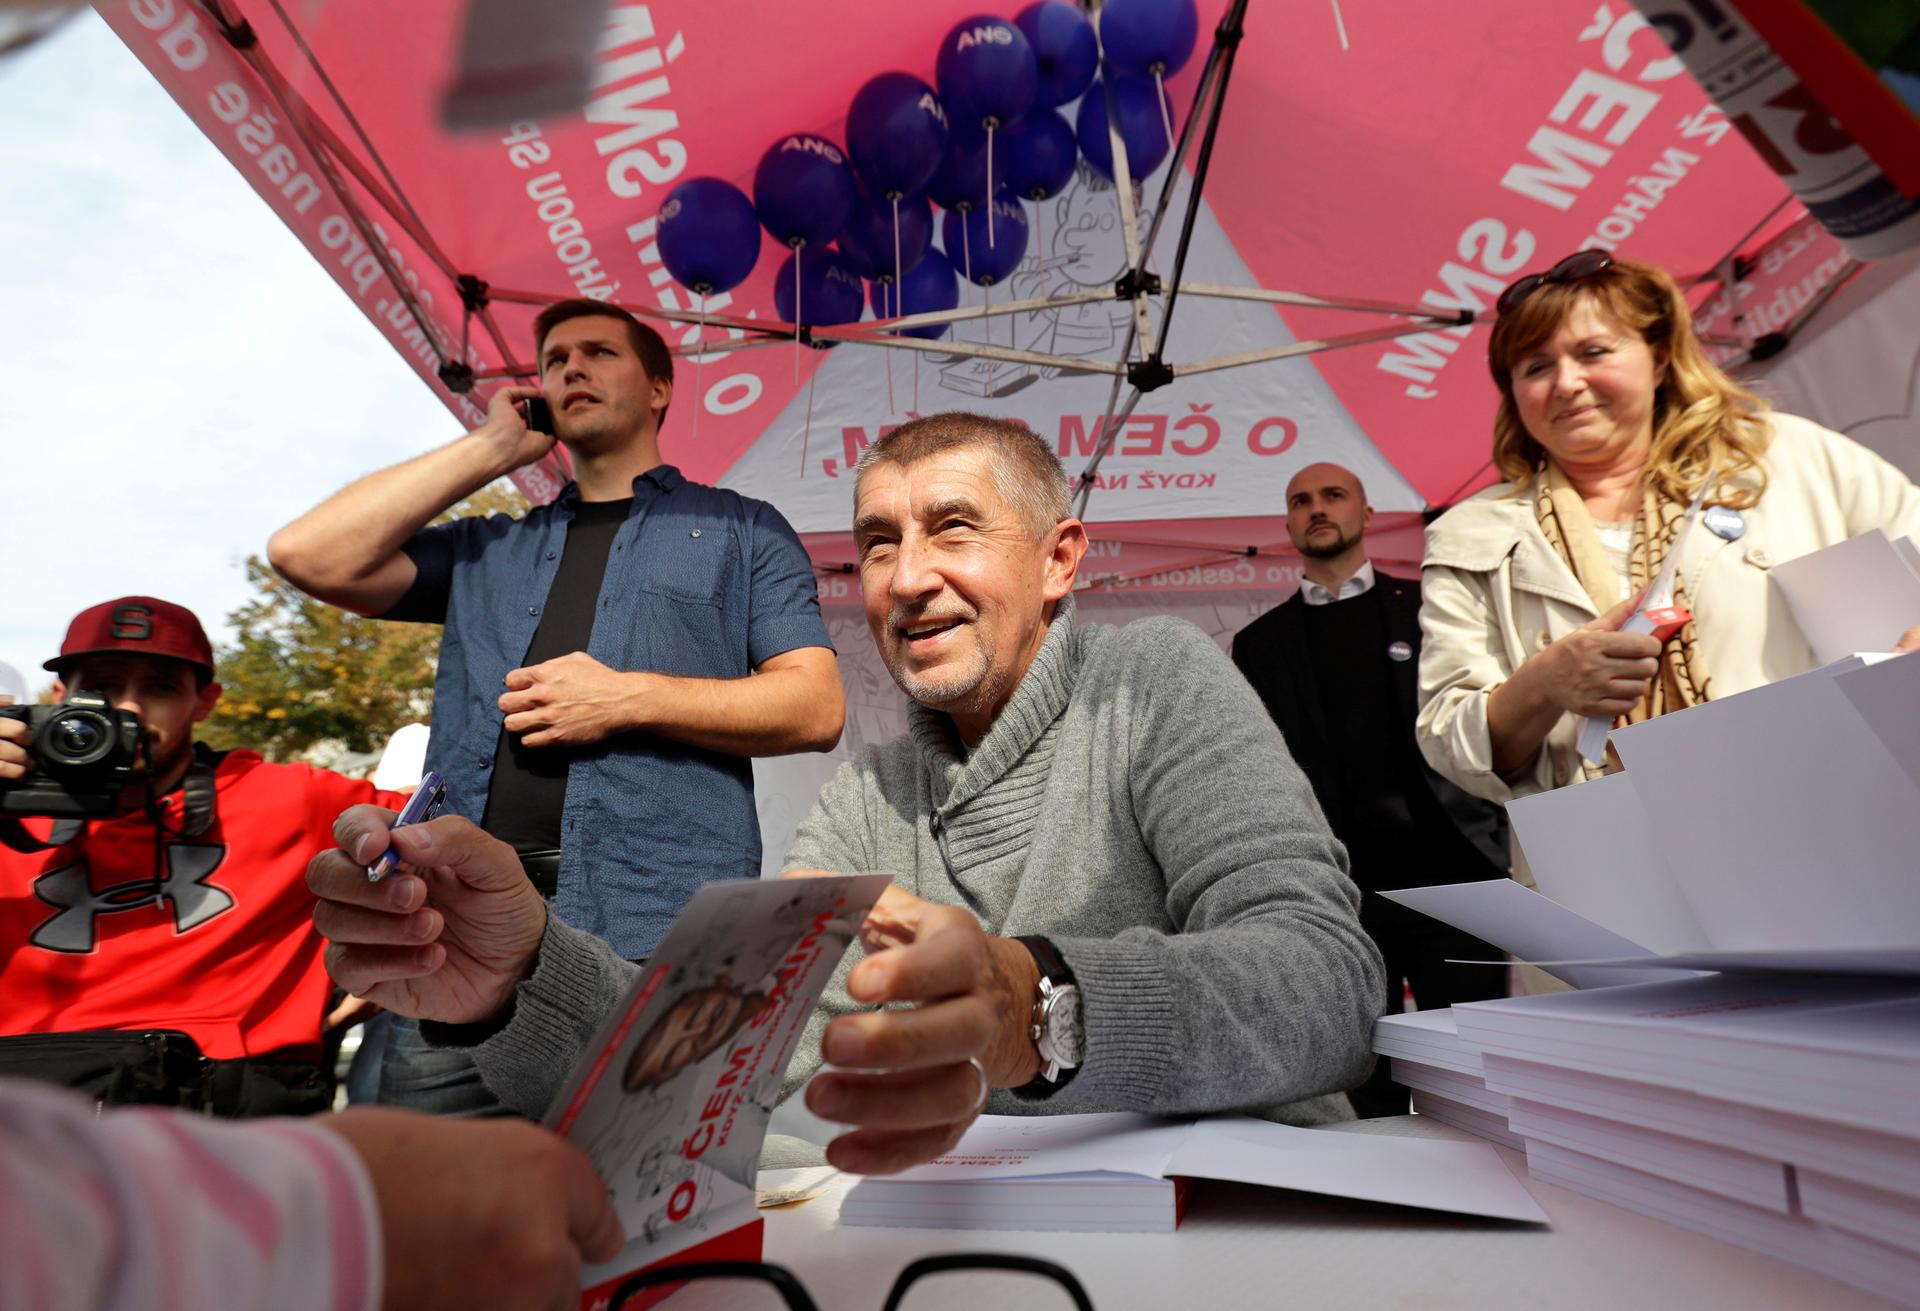 The leader of ANO party Andrej Babis signs books for a supporter during an election campaign rally in Prague, Czech Republic September 28, 2017. 